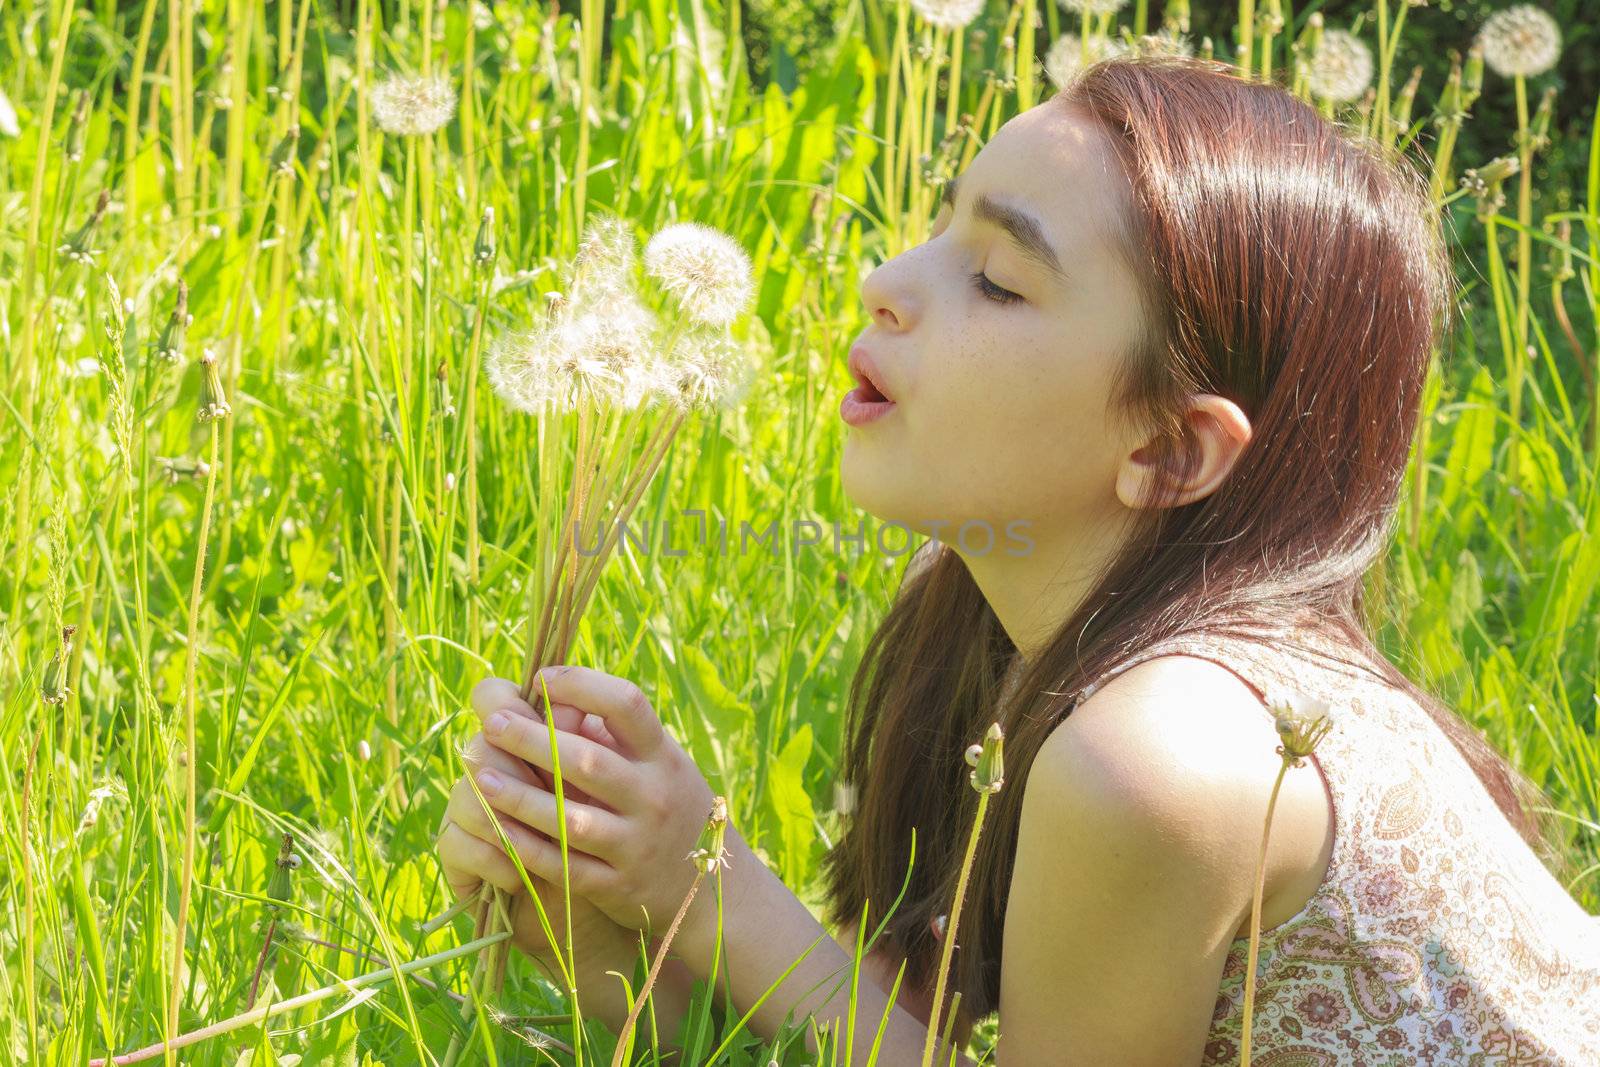 Little Girl Busy Blowing Dandelion Seeds In the Park by manaemedia